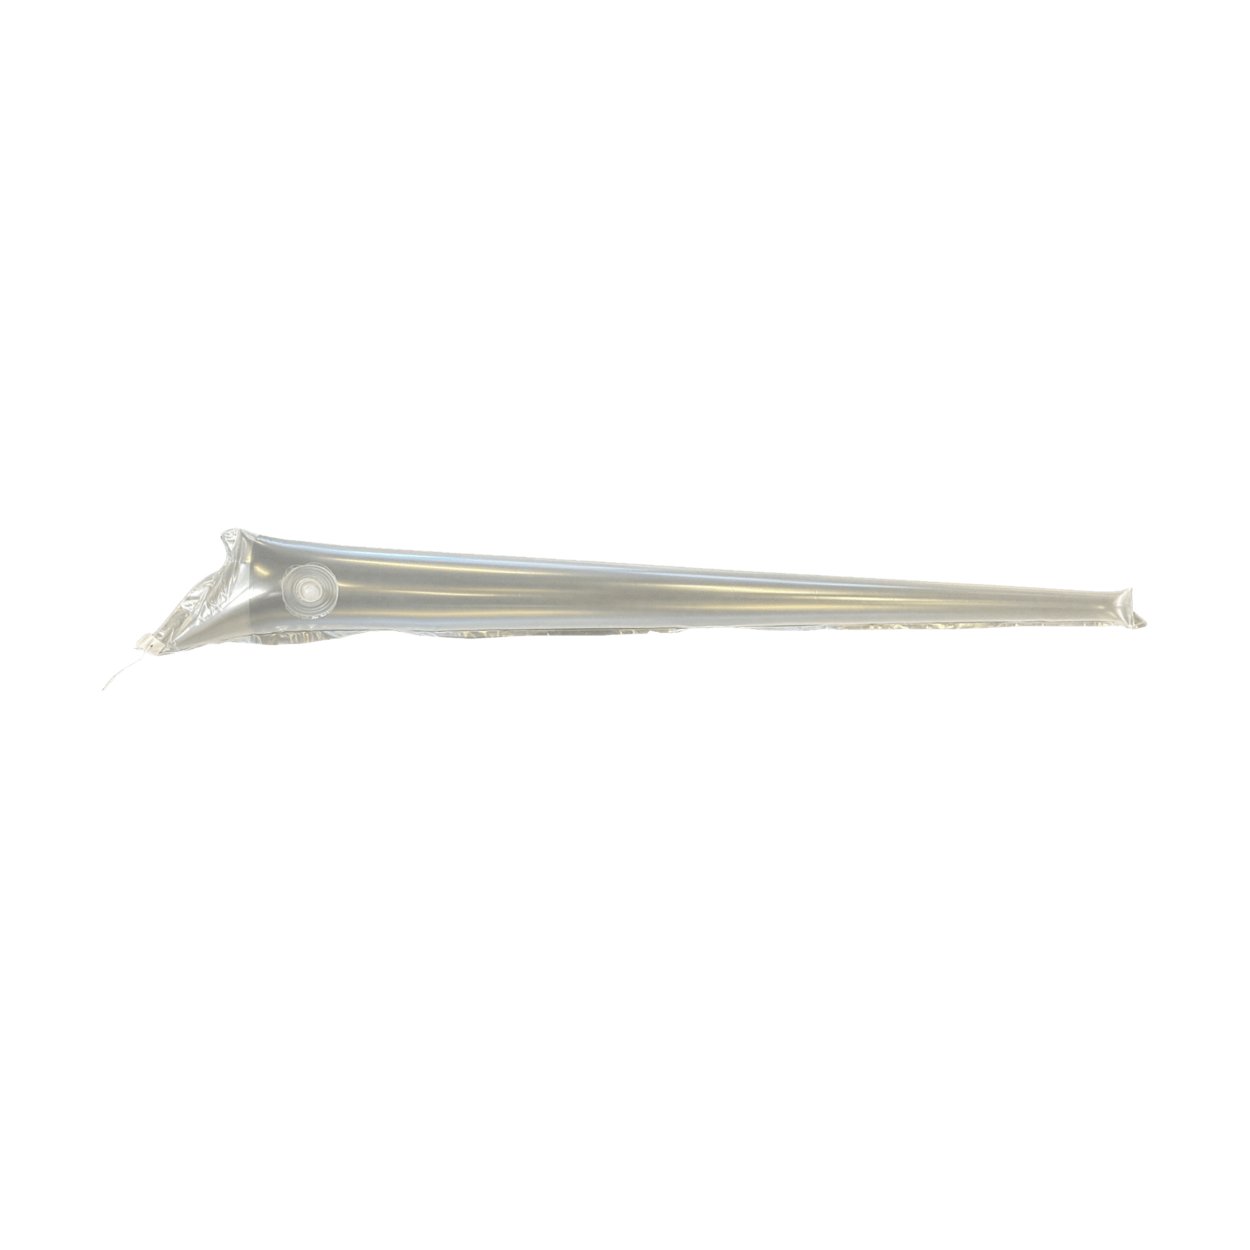 Duotone Strut Bladder Ventis right 2024 - Worthing Watersports - 9010583192000 - DT Spareparts - Duotone X